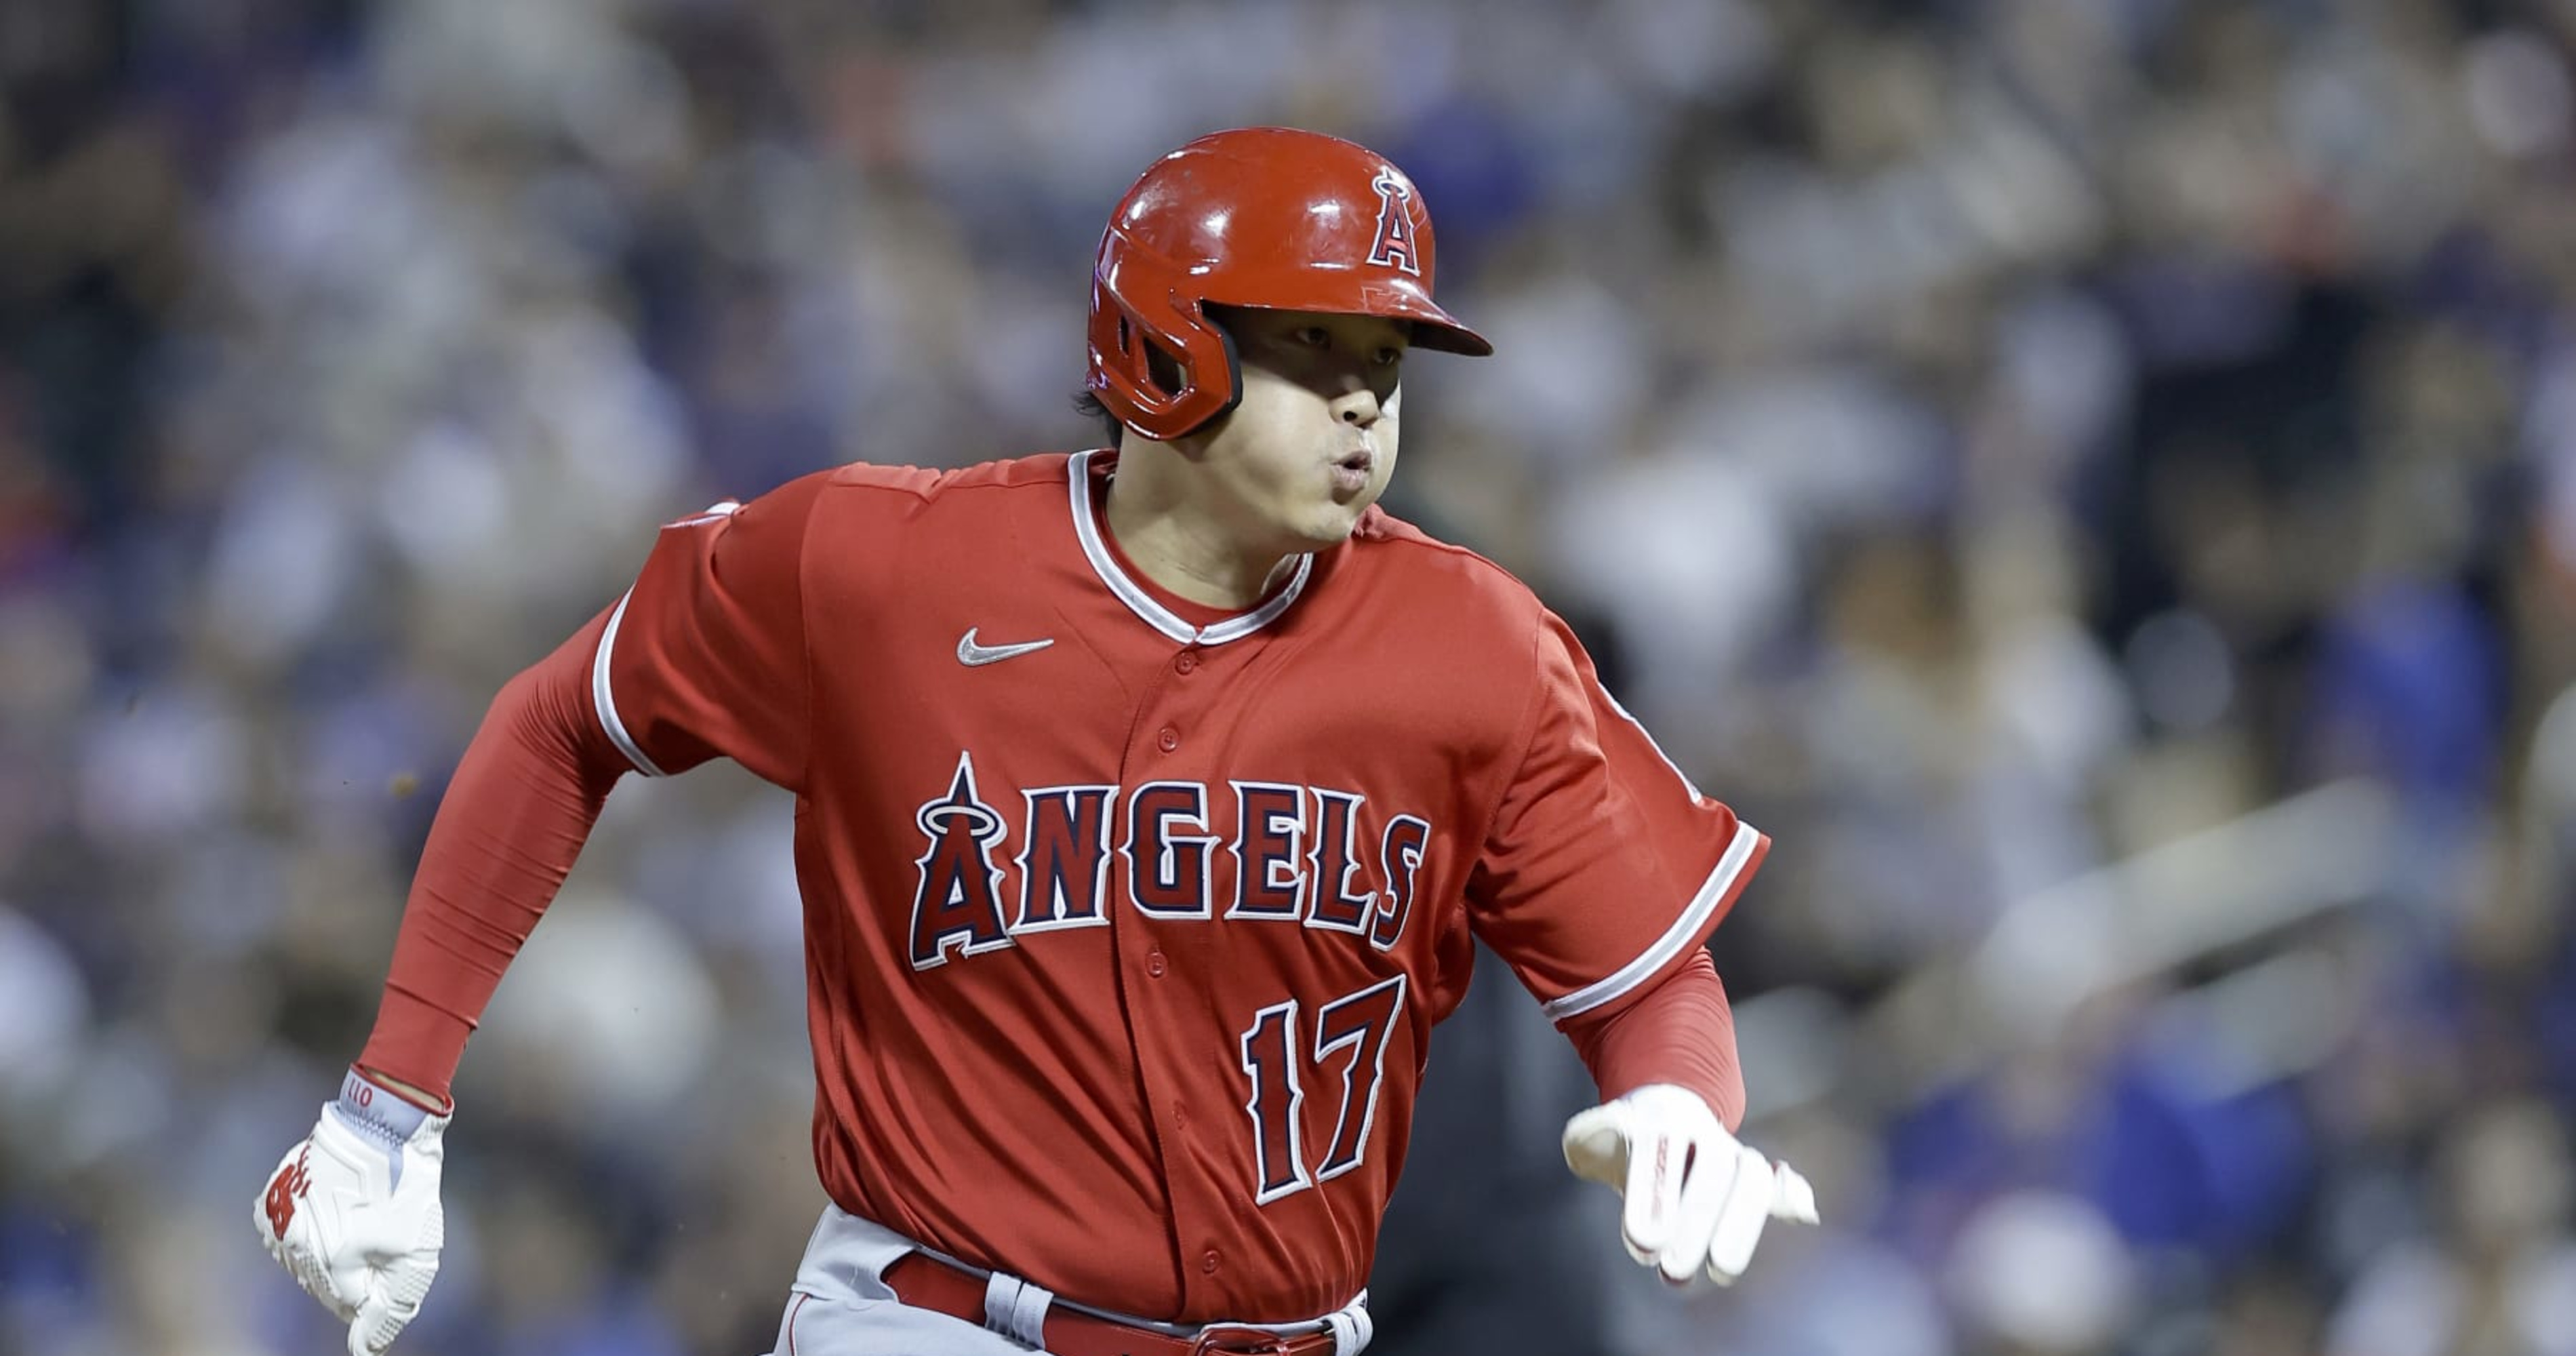 Angels failed to stop Shohei Ohtani from disastrous elbow injury